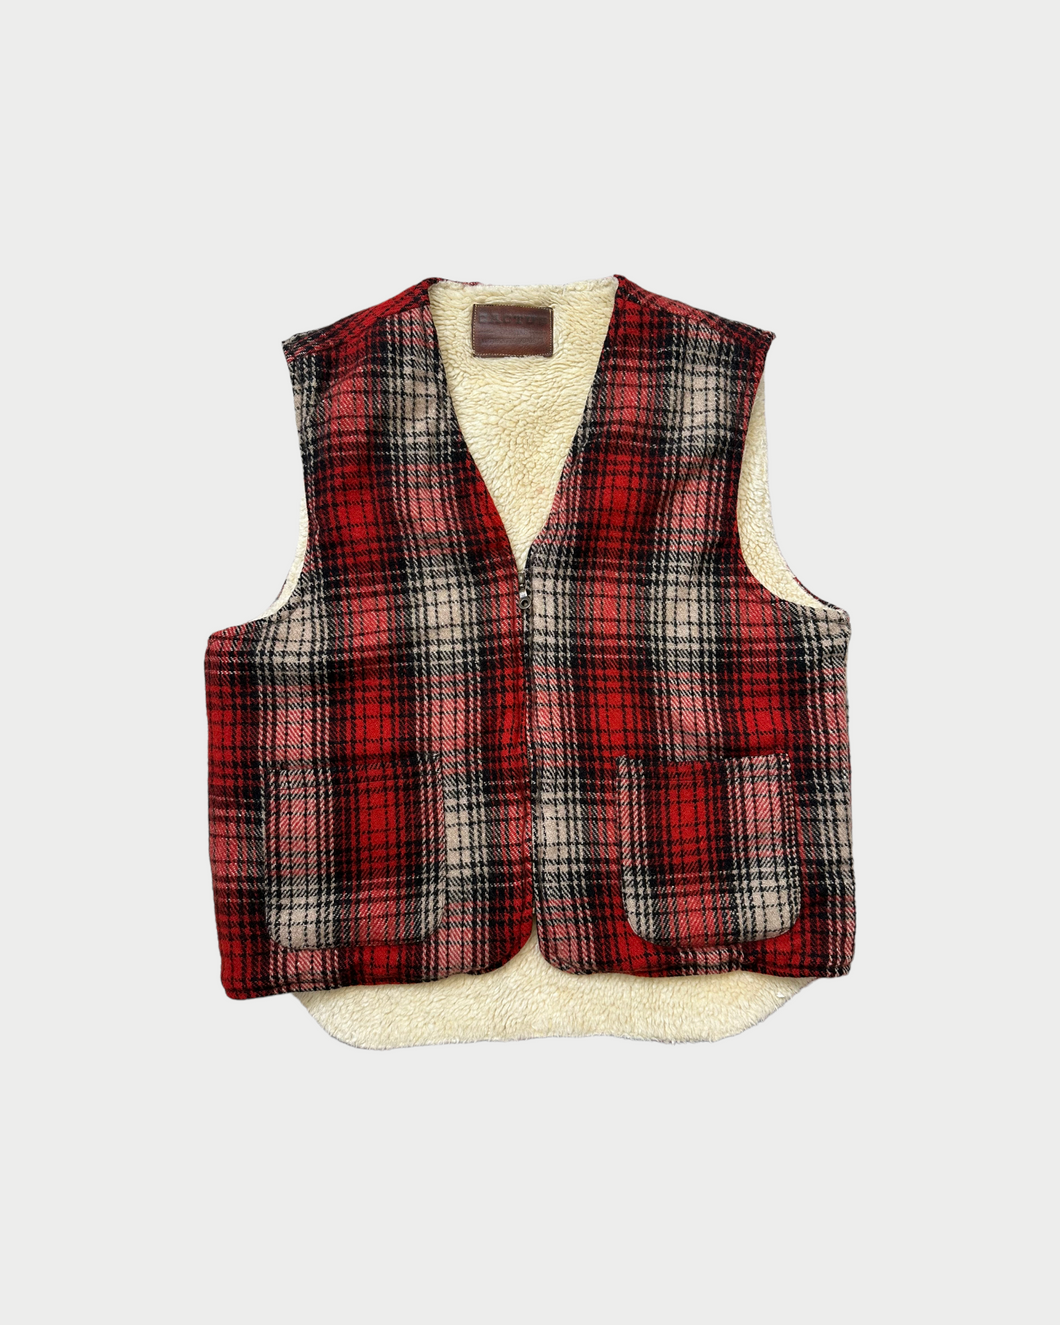 Vintage Cactus Clothing Plaid Wool Sherpa Lined Trucker Vest (XL)